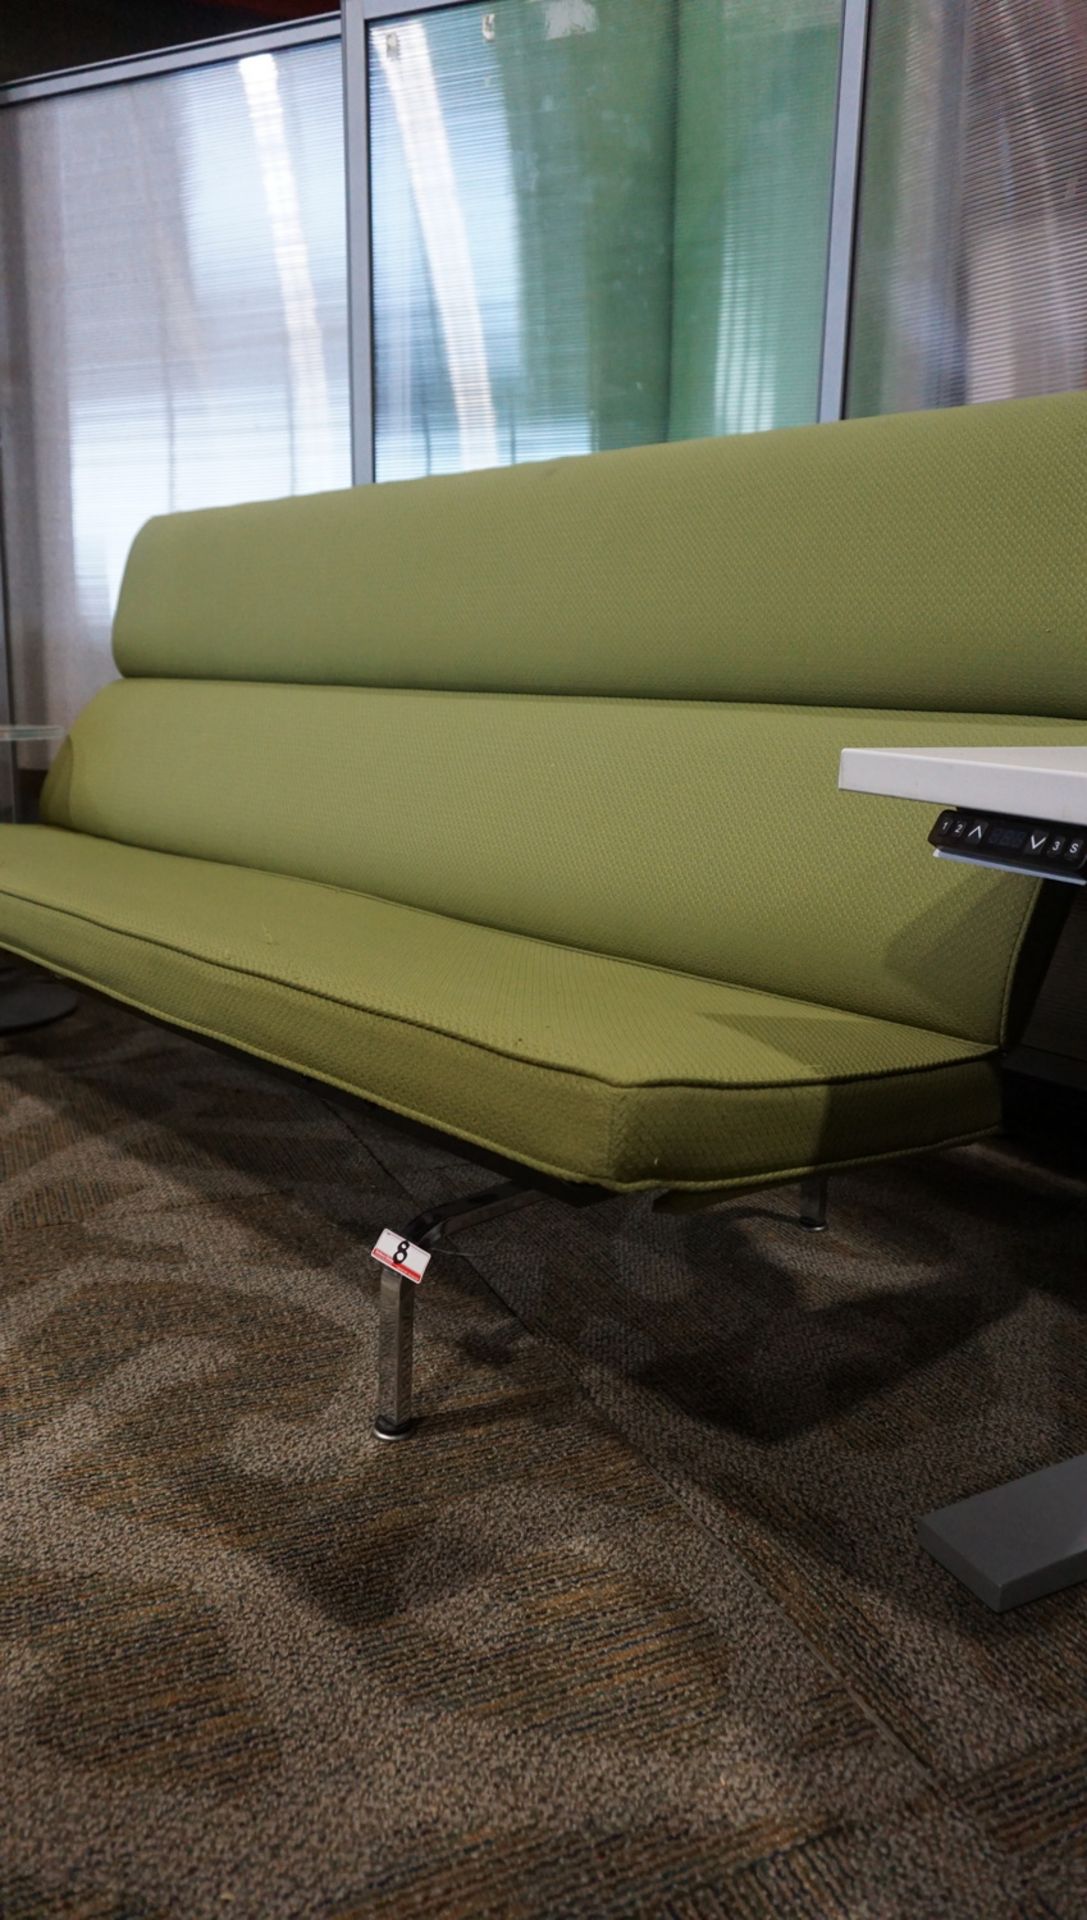 HERMAN MILL EAMES GREEN UPHOLSTERED ARMLESS SOFA ($5,600 MSRP) - Image 2 of 3